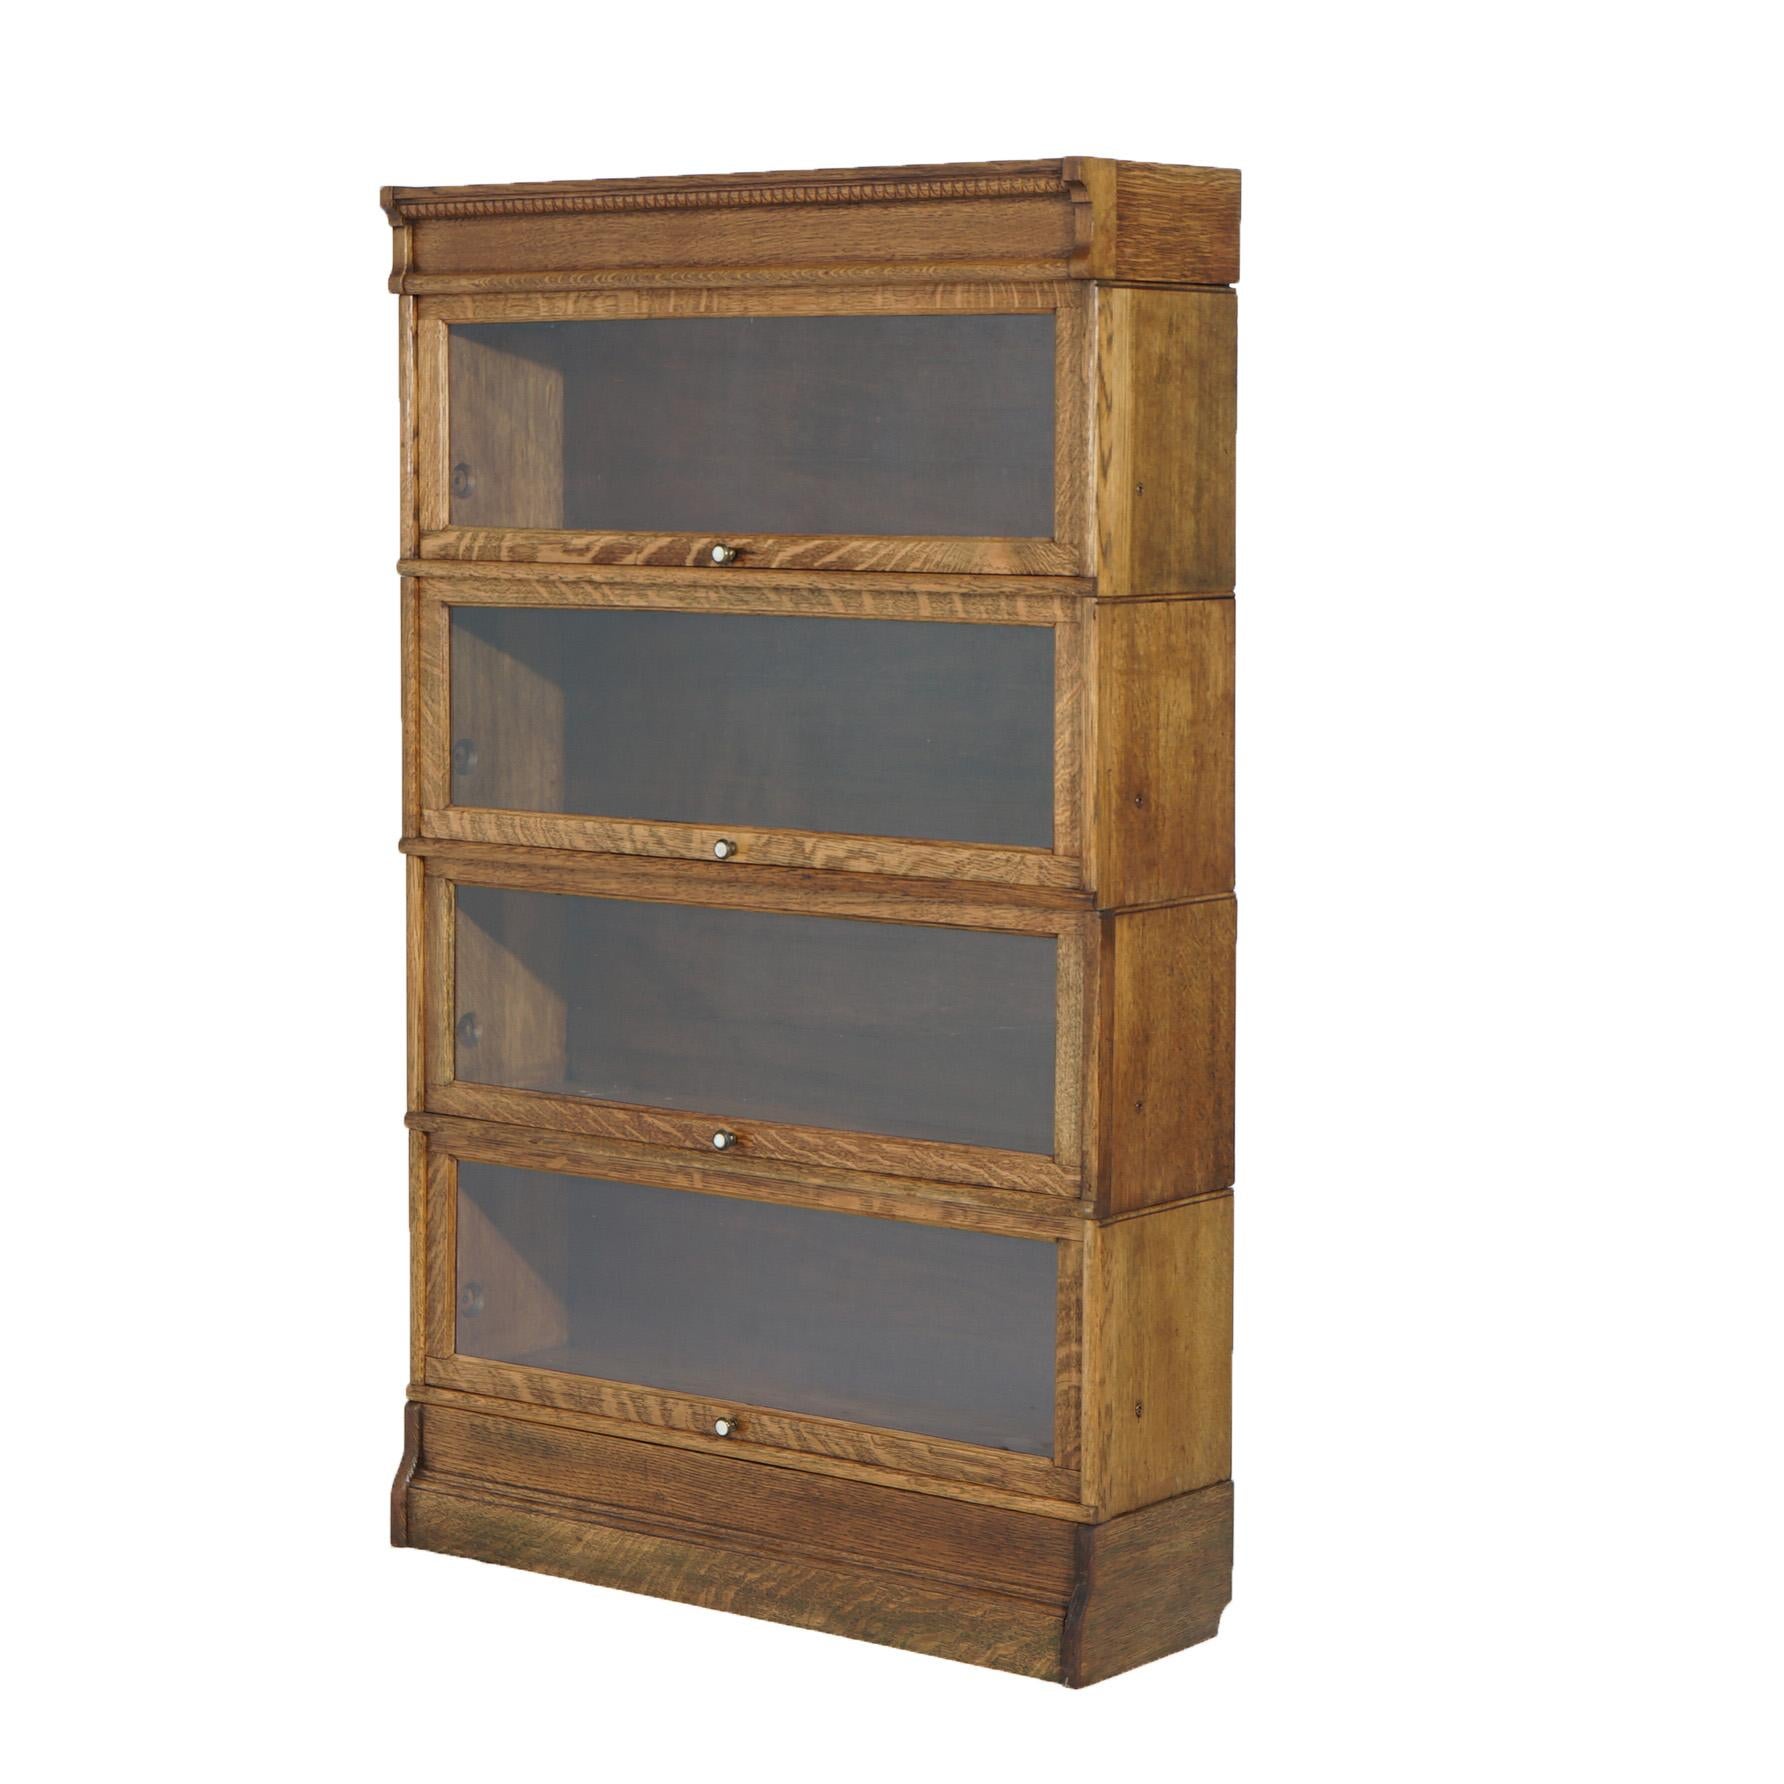 An antique Arts and Crafts barrister bookcase offers quarter sawn oak construction with incised egg and dart frieze over four stacks, each with pull out glass doors, raised on ogee base, c1910

Measures - 56.5